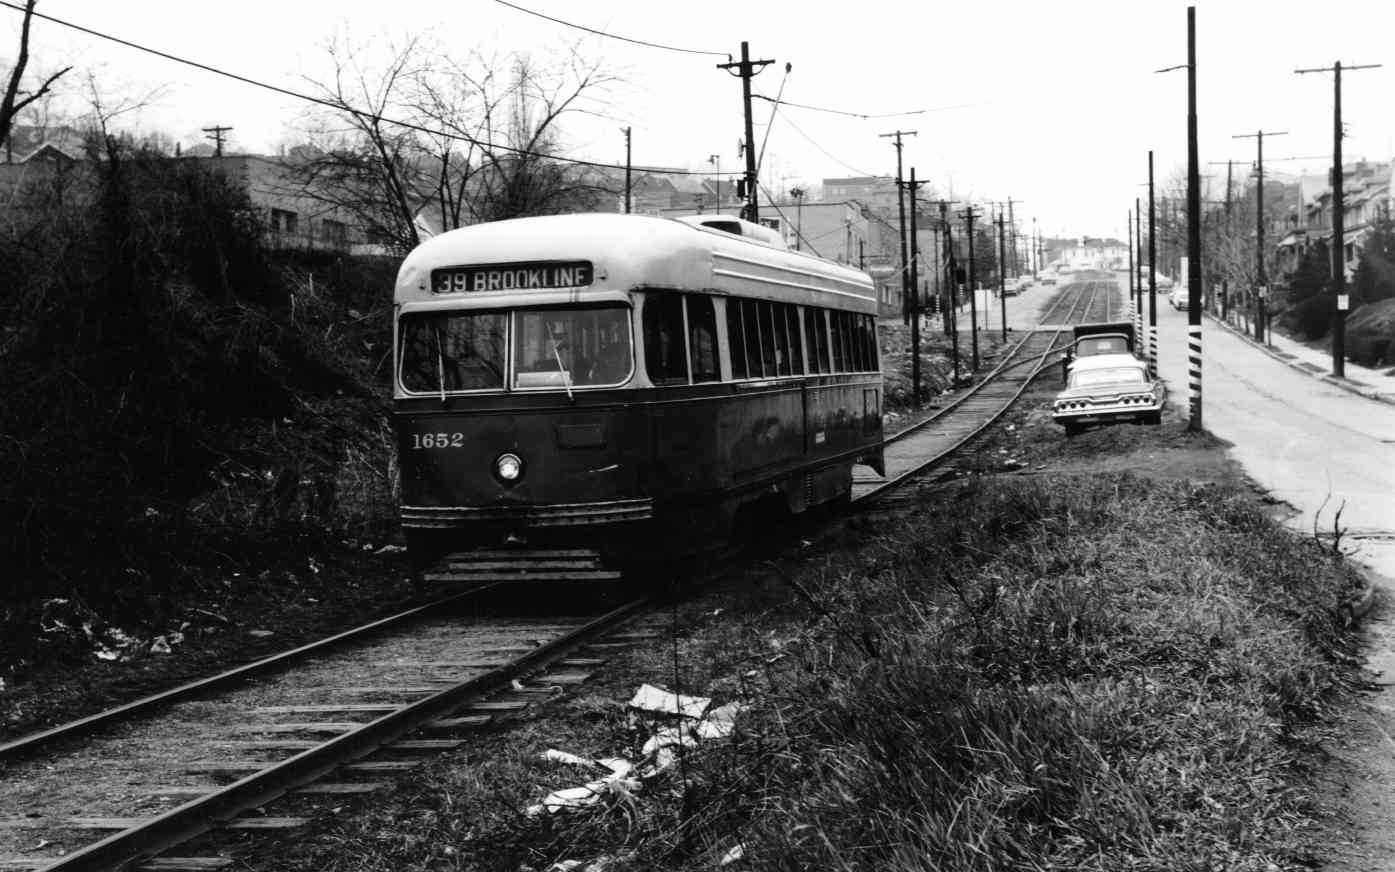 The 39-Brookline trolley heads towards
the loop at the lower end of the Boulevard.
It has just passed Breining Street in the
background and is positioned at the bottom
of Birchland Street.